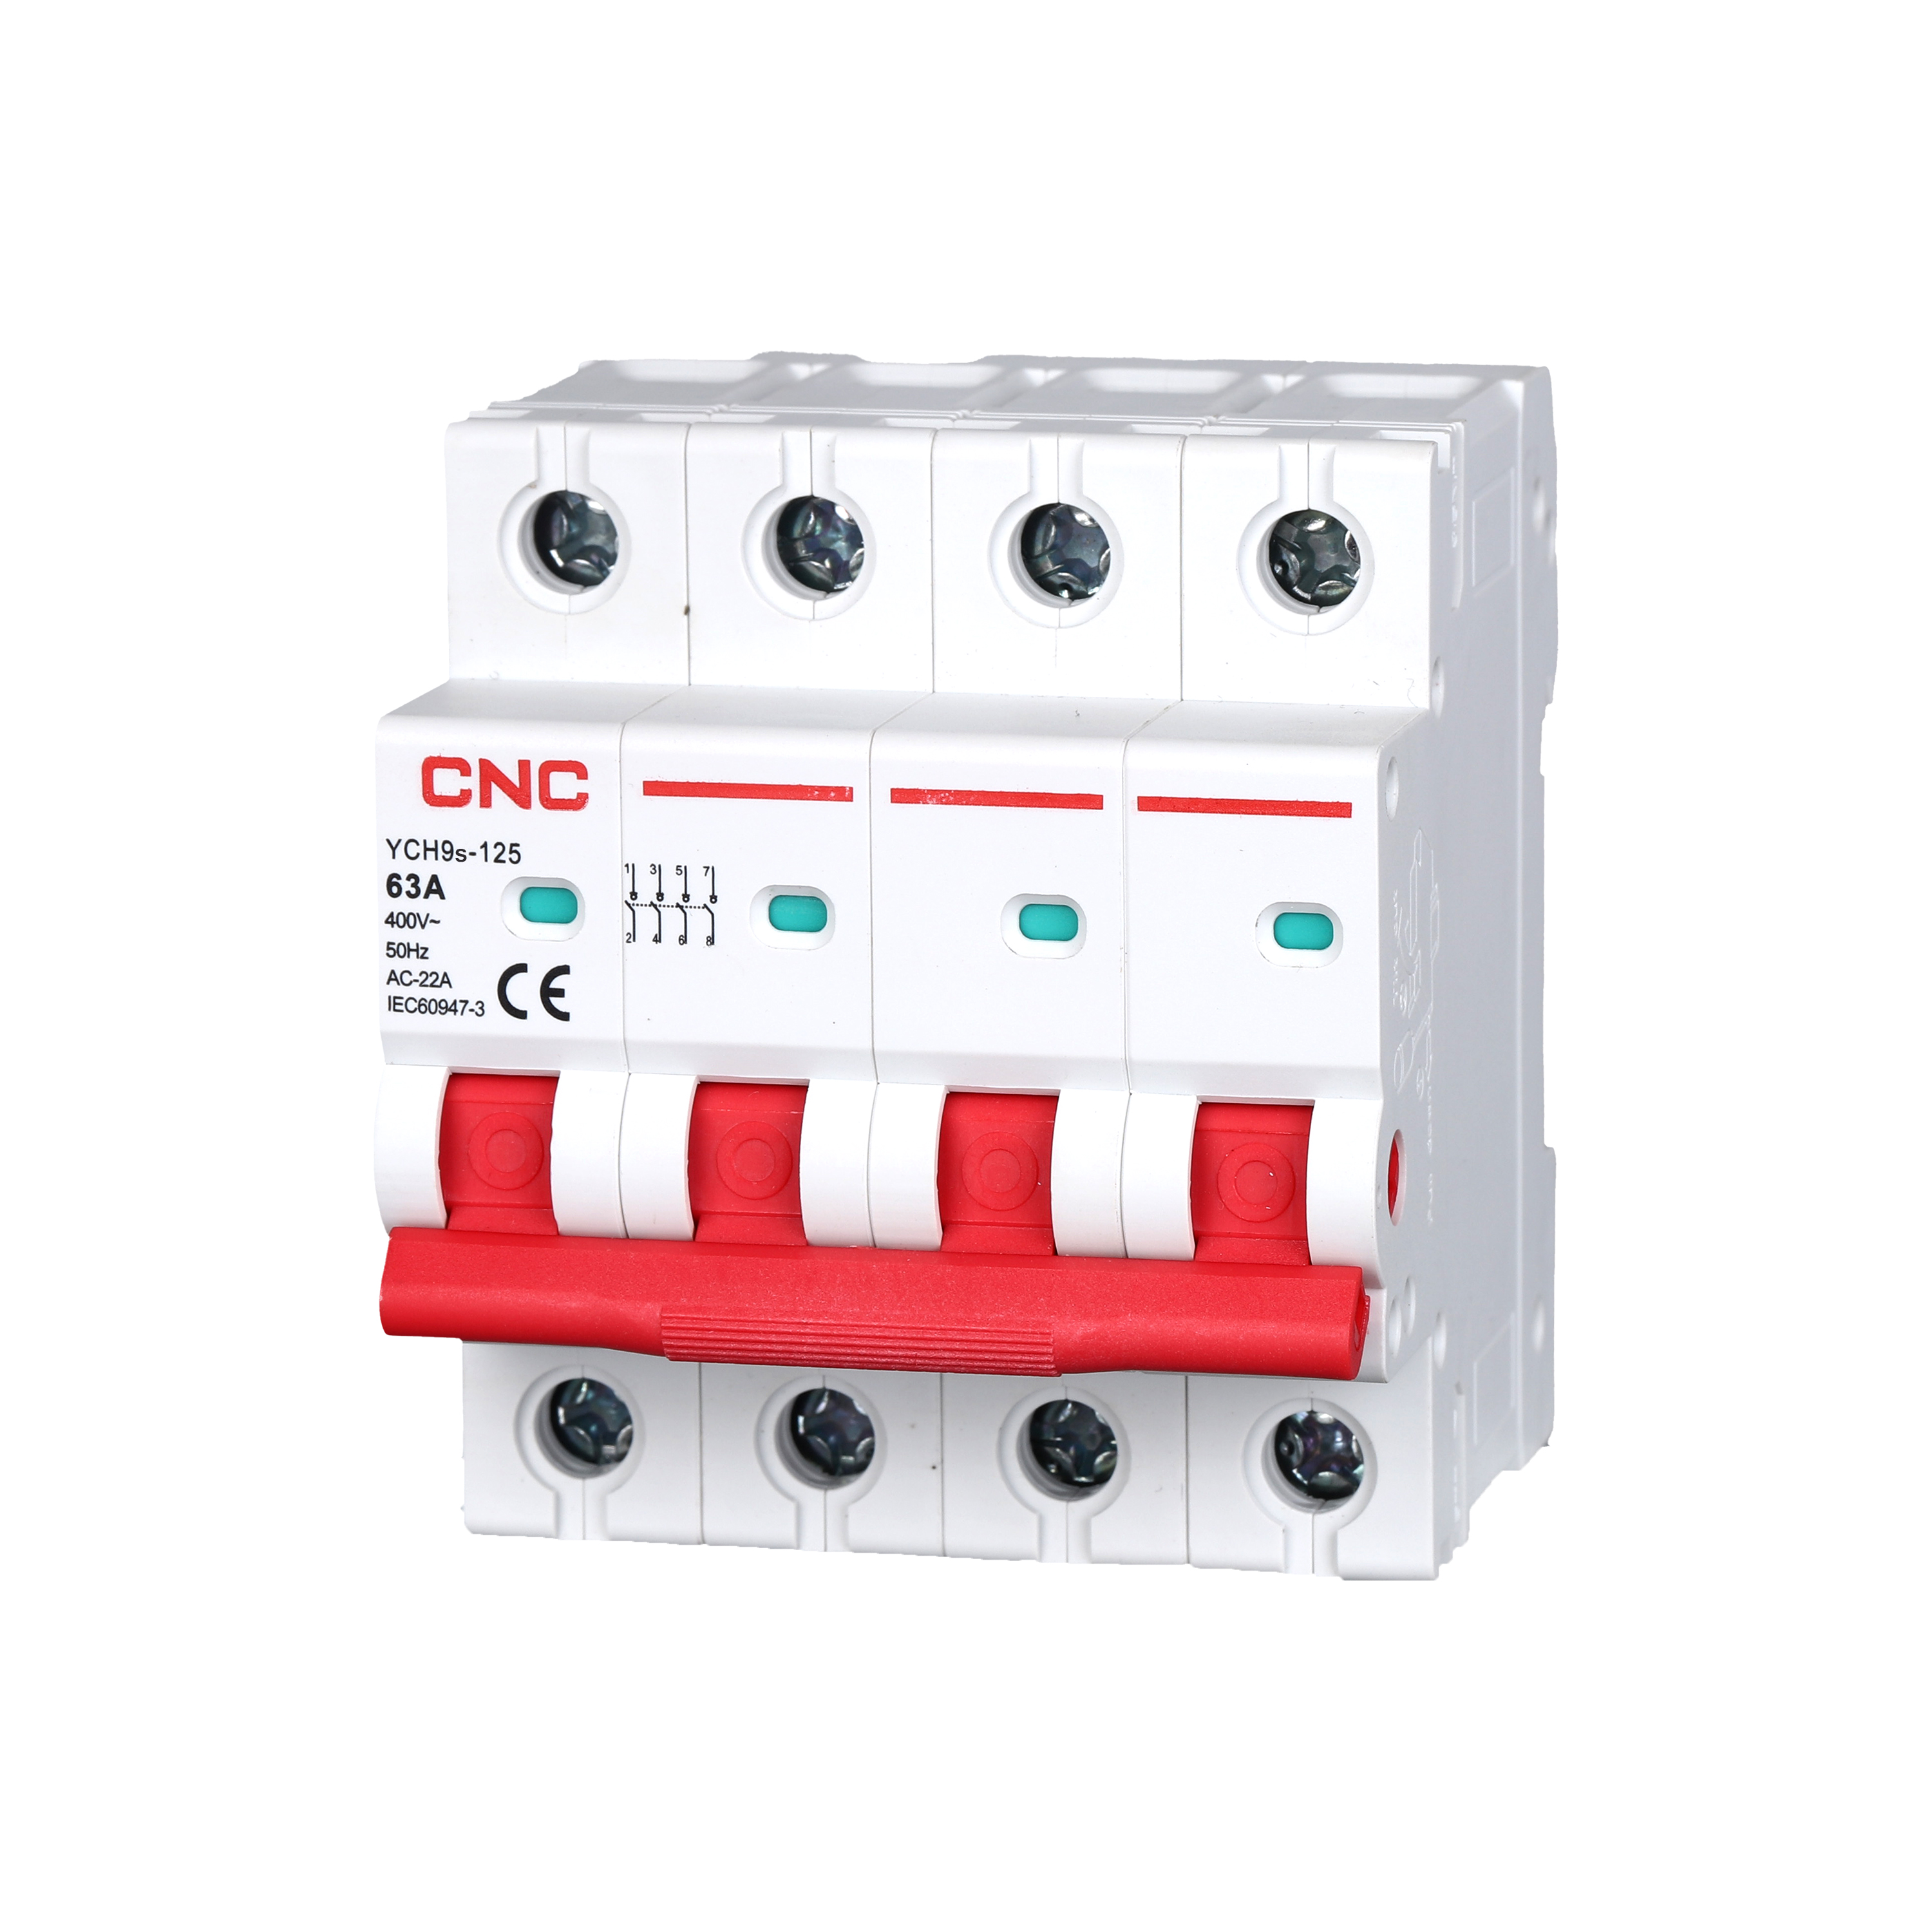 CNC |YCH9s-125 Isolation Switch